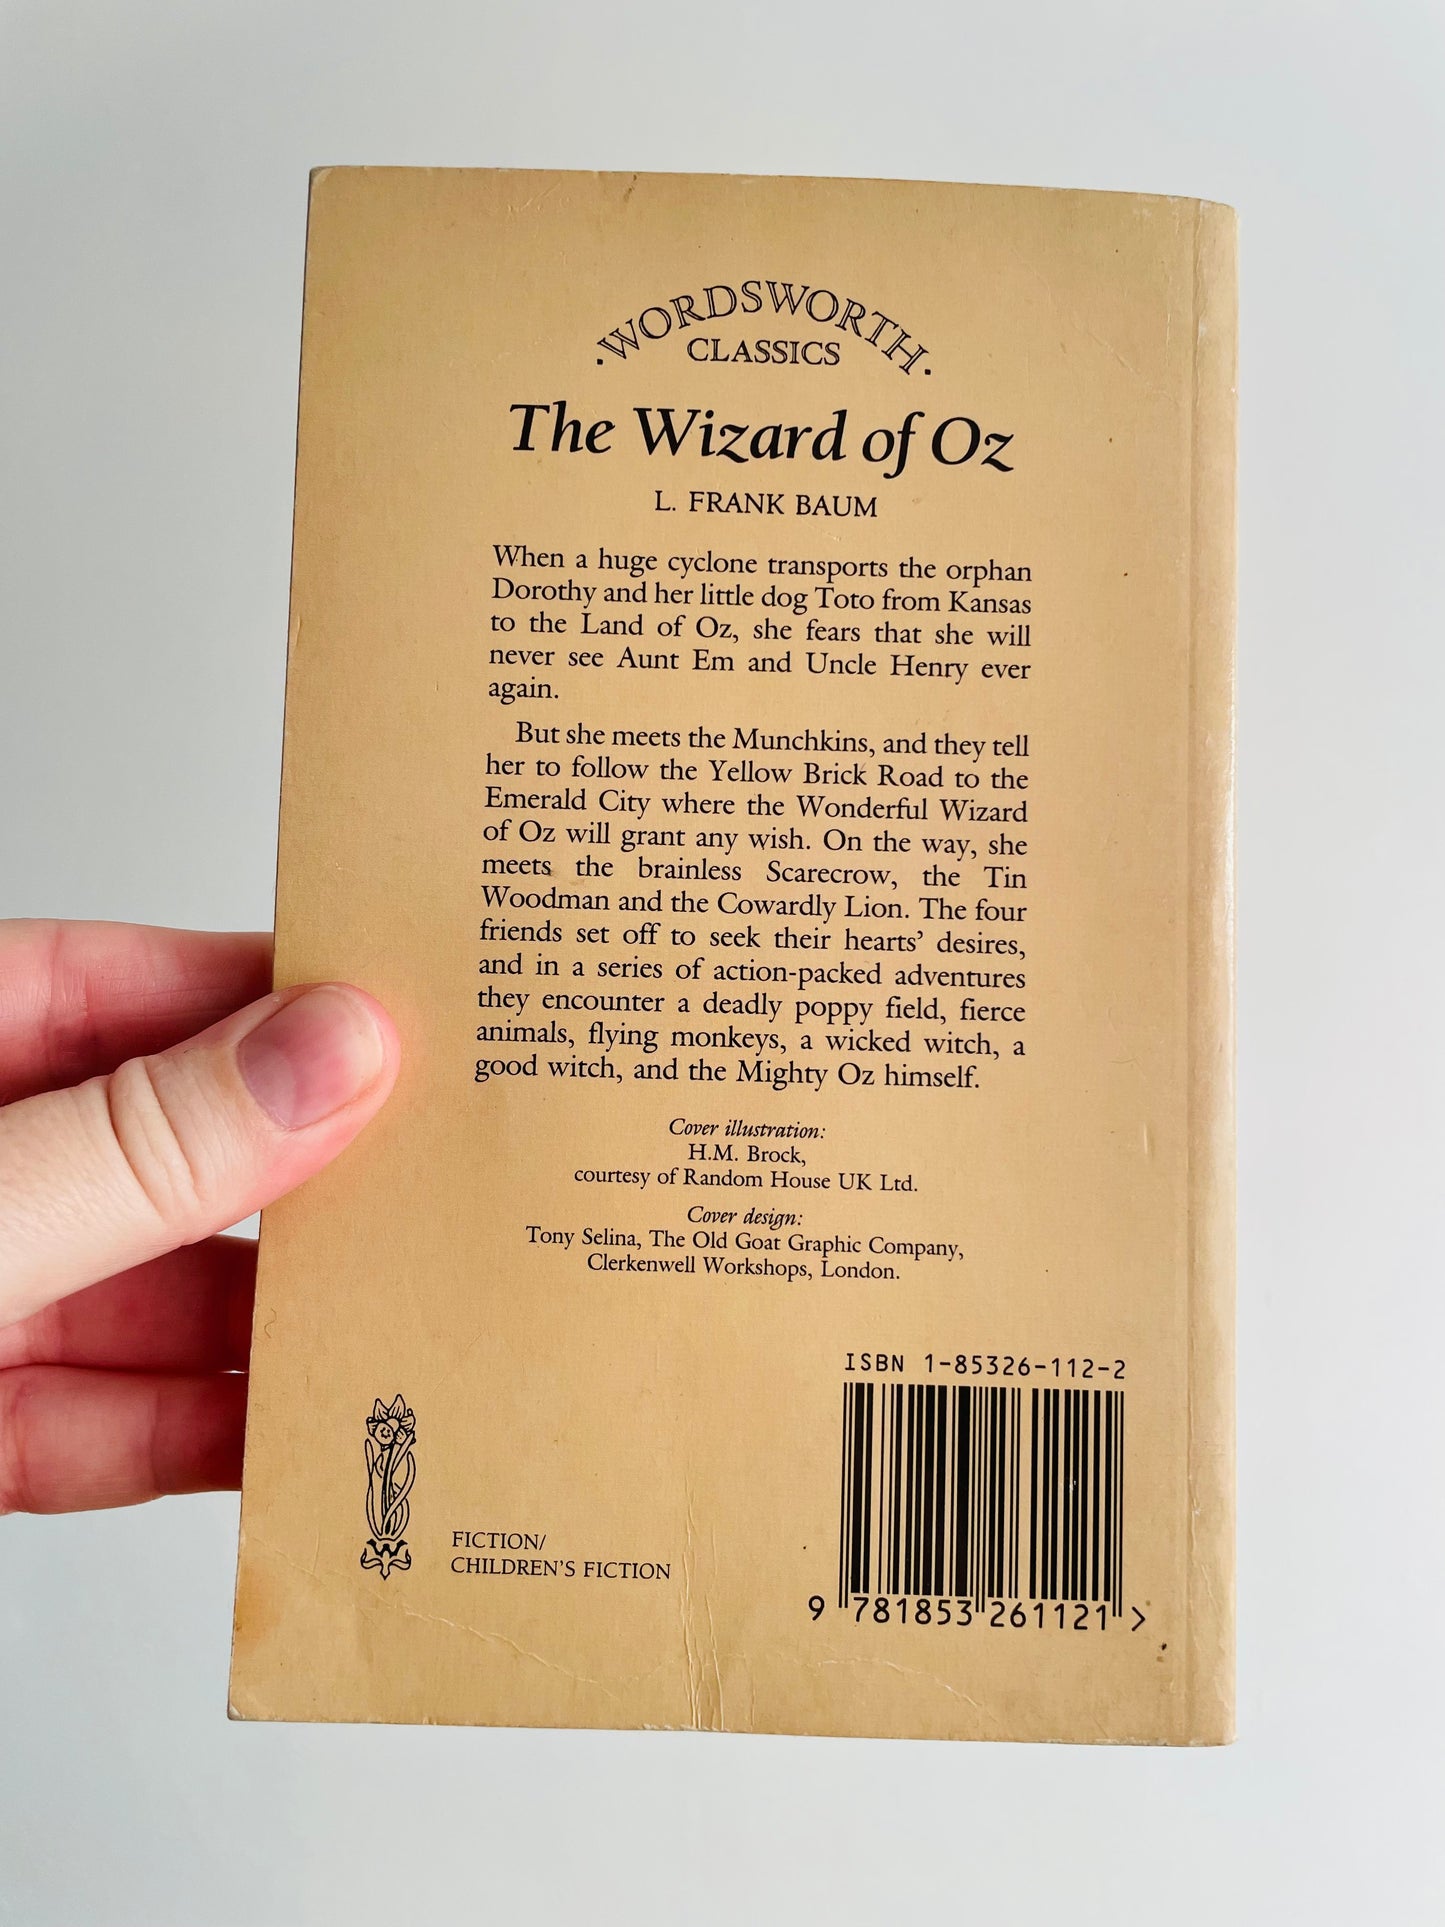 The Wizard of Oz Paperback Book by L. Frank Baum - Wordsworth Classics (1993)